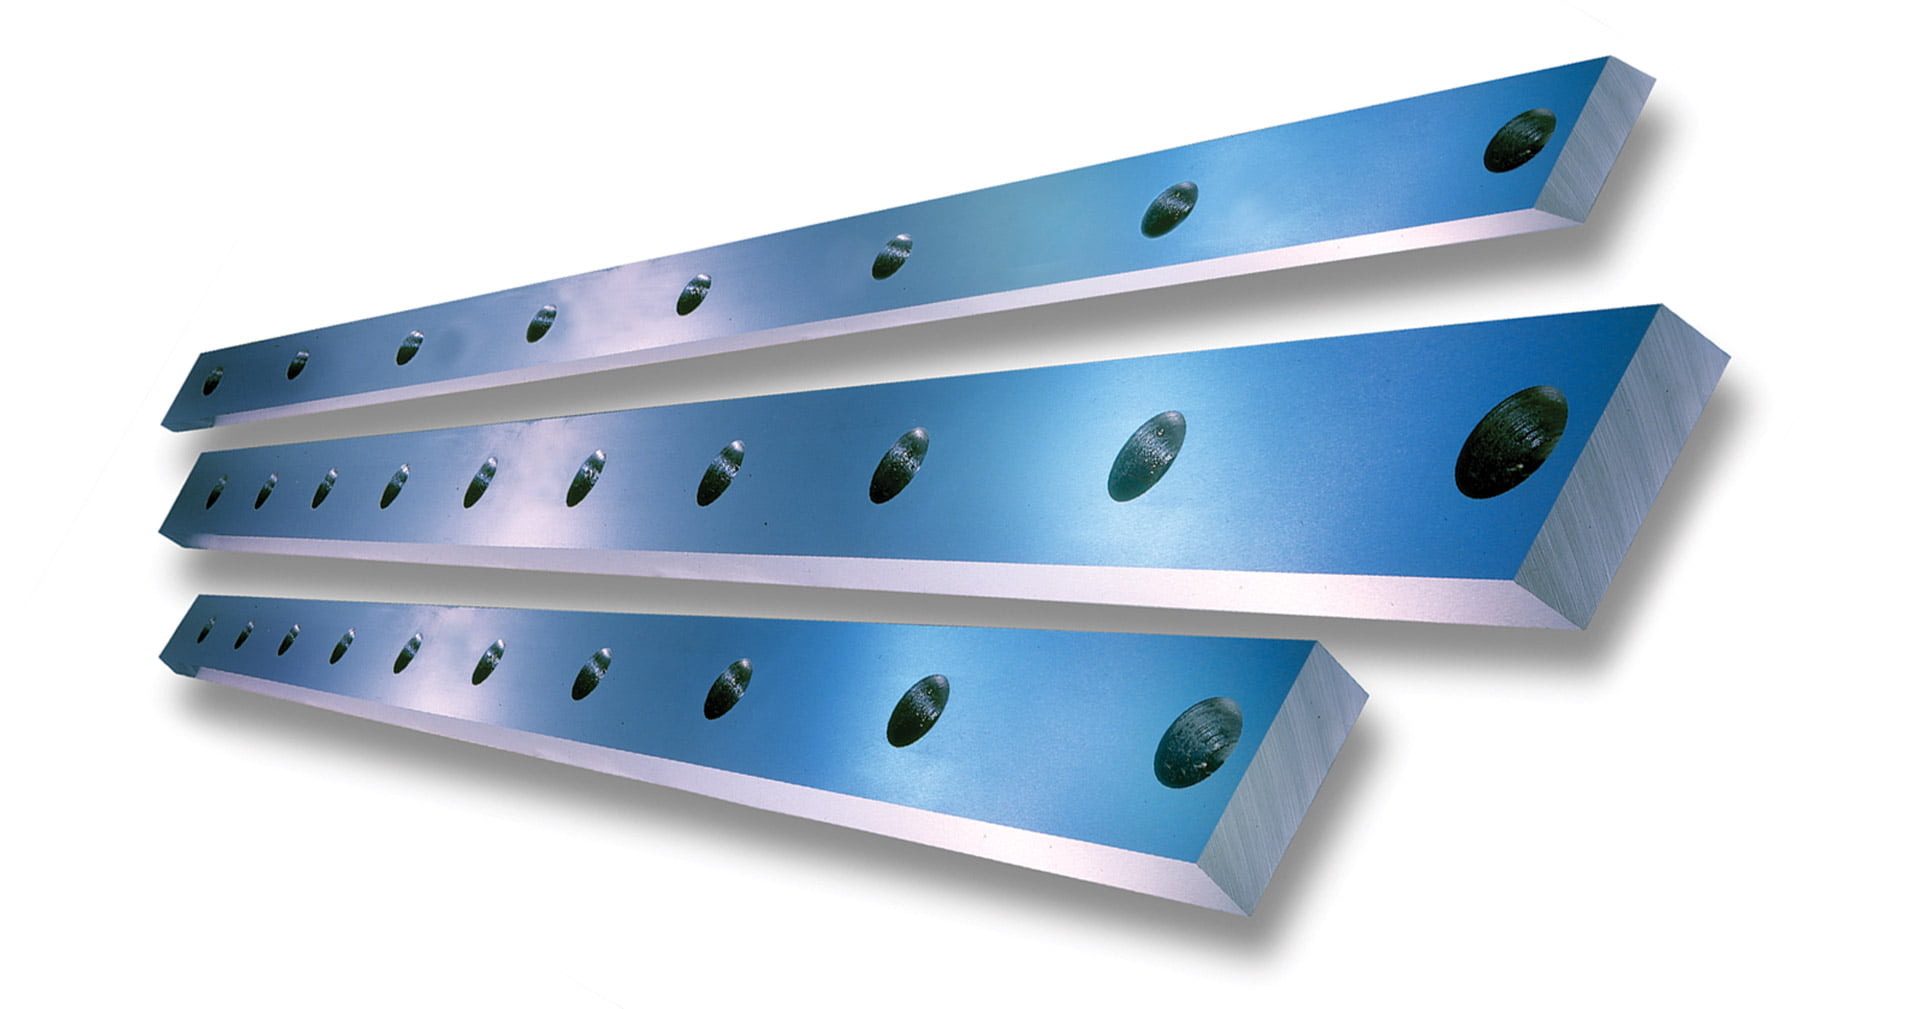 high quality guillotine blades designed for use with AFM machinery